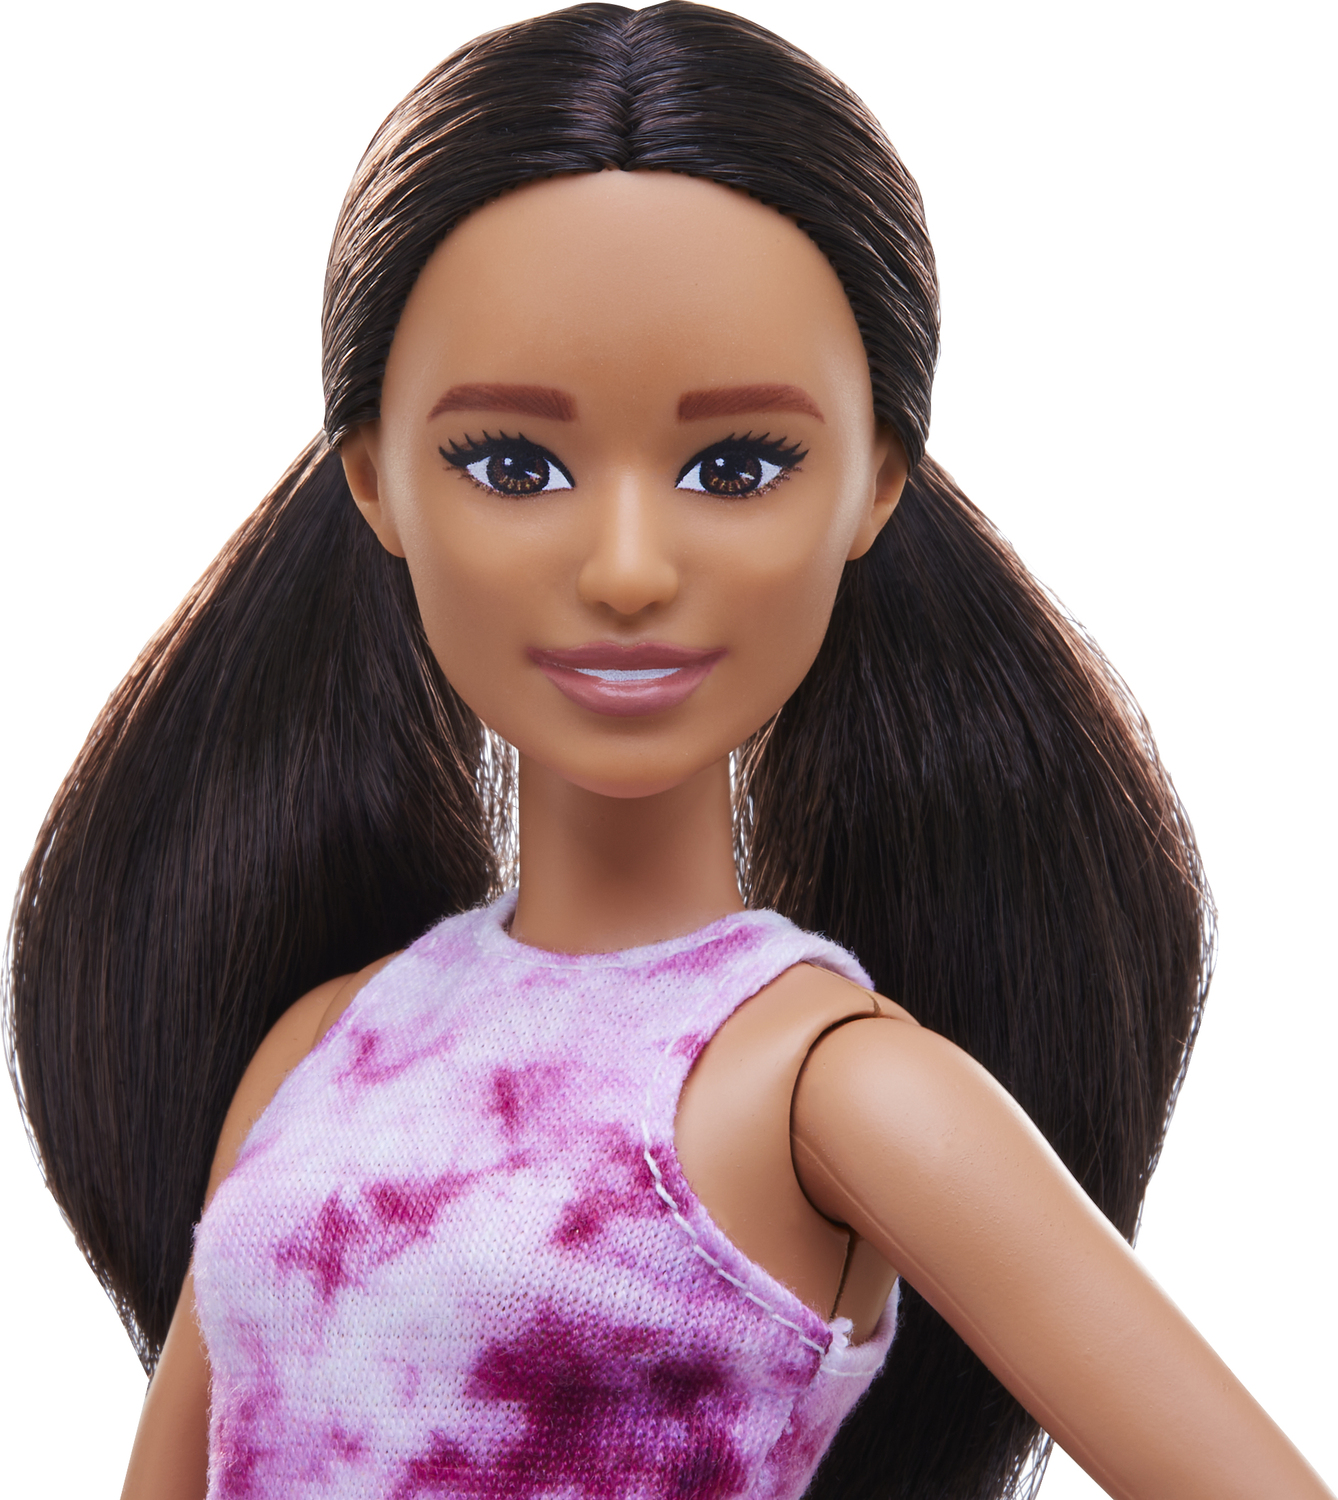 Barbie Doll And Accessories - HCD44